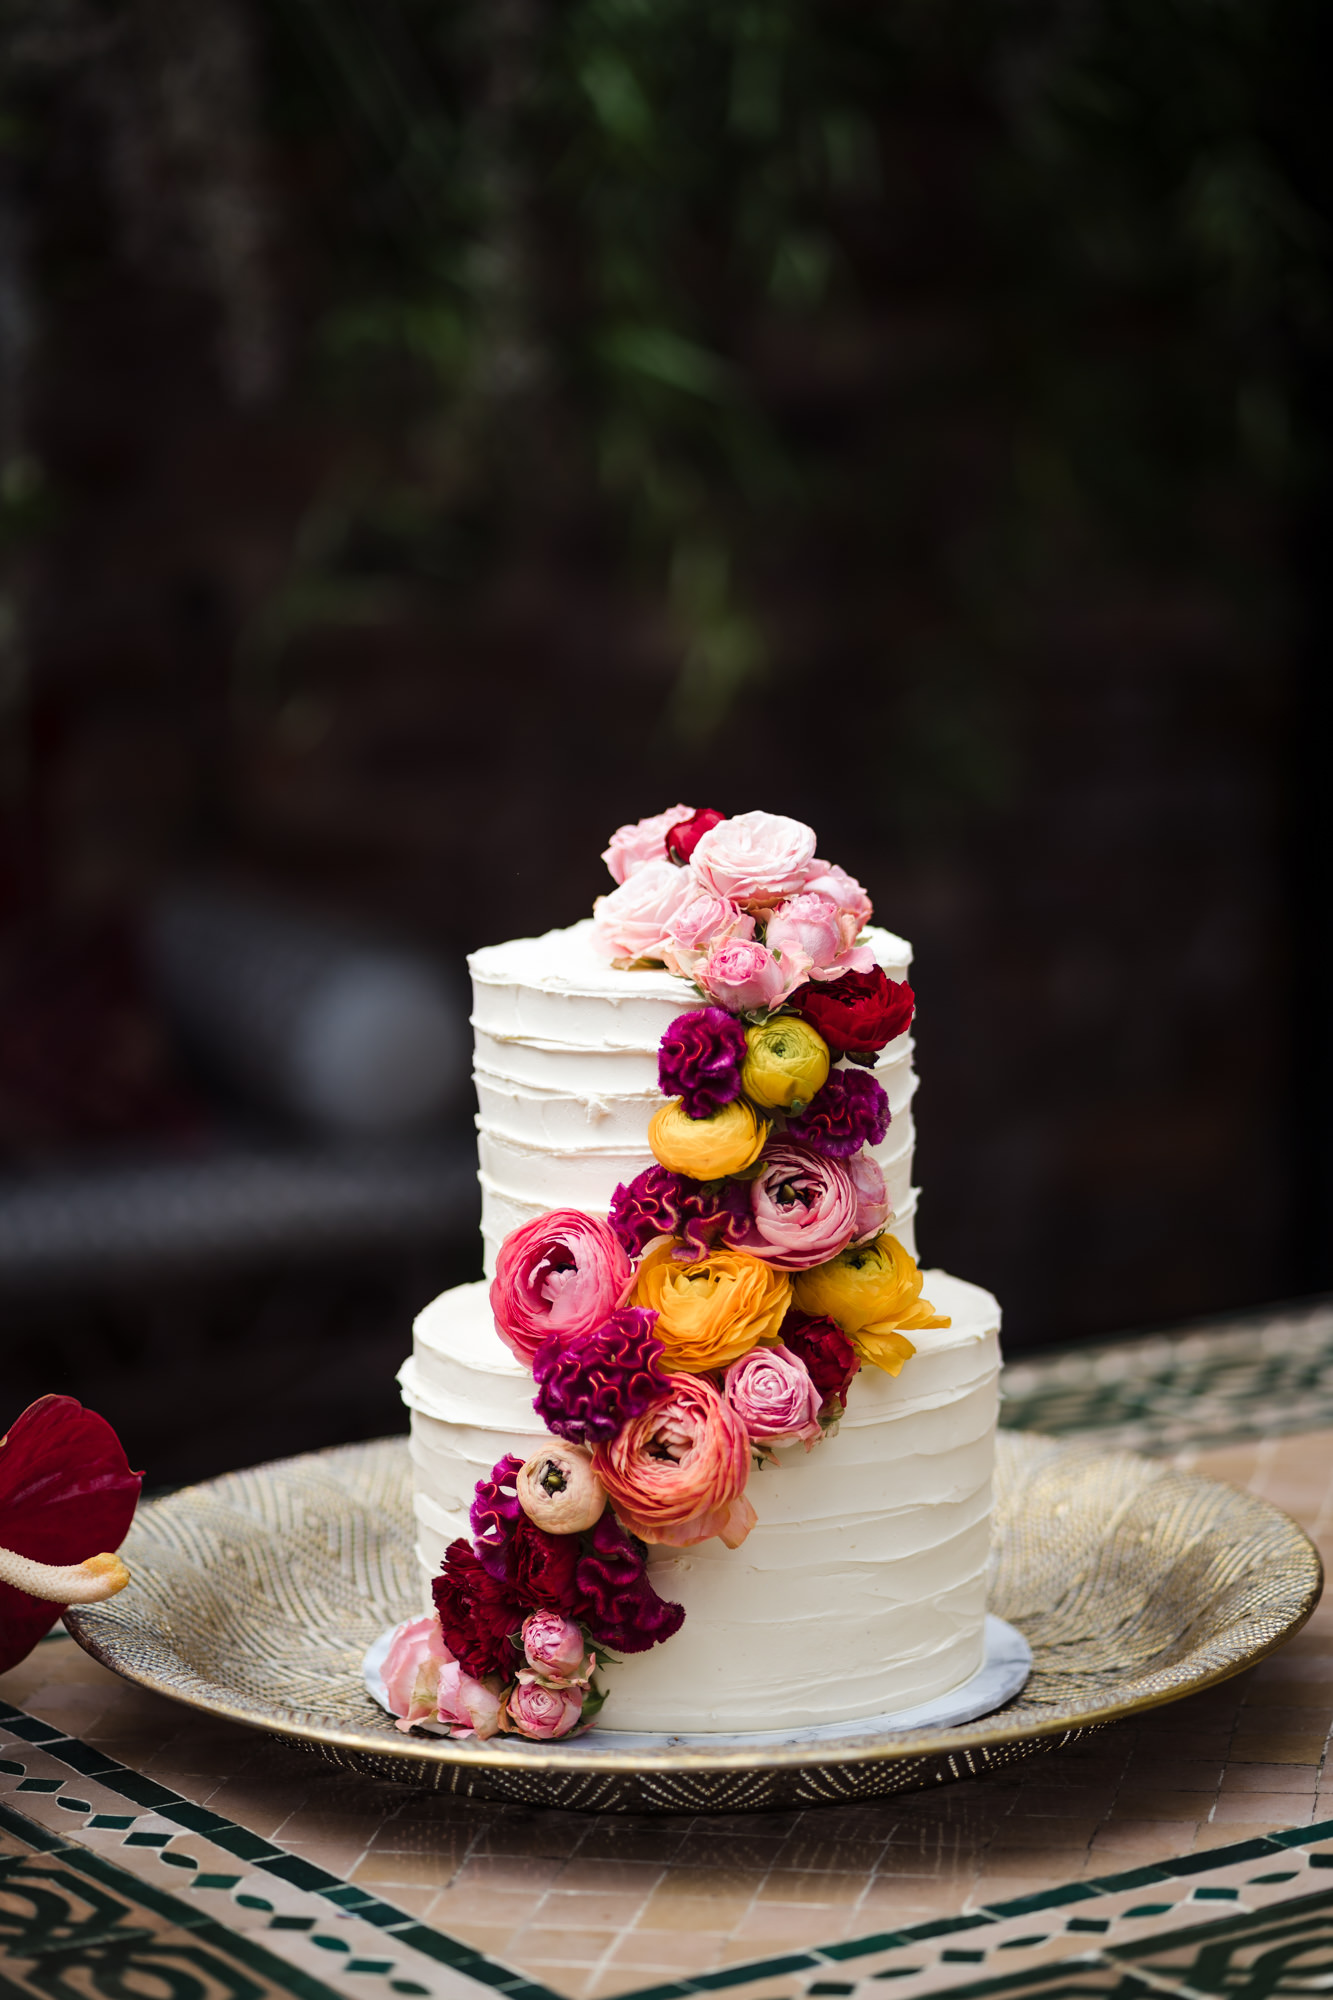 white two tiered wedding cake decorated with pink red yellow flowers